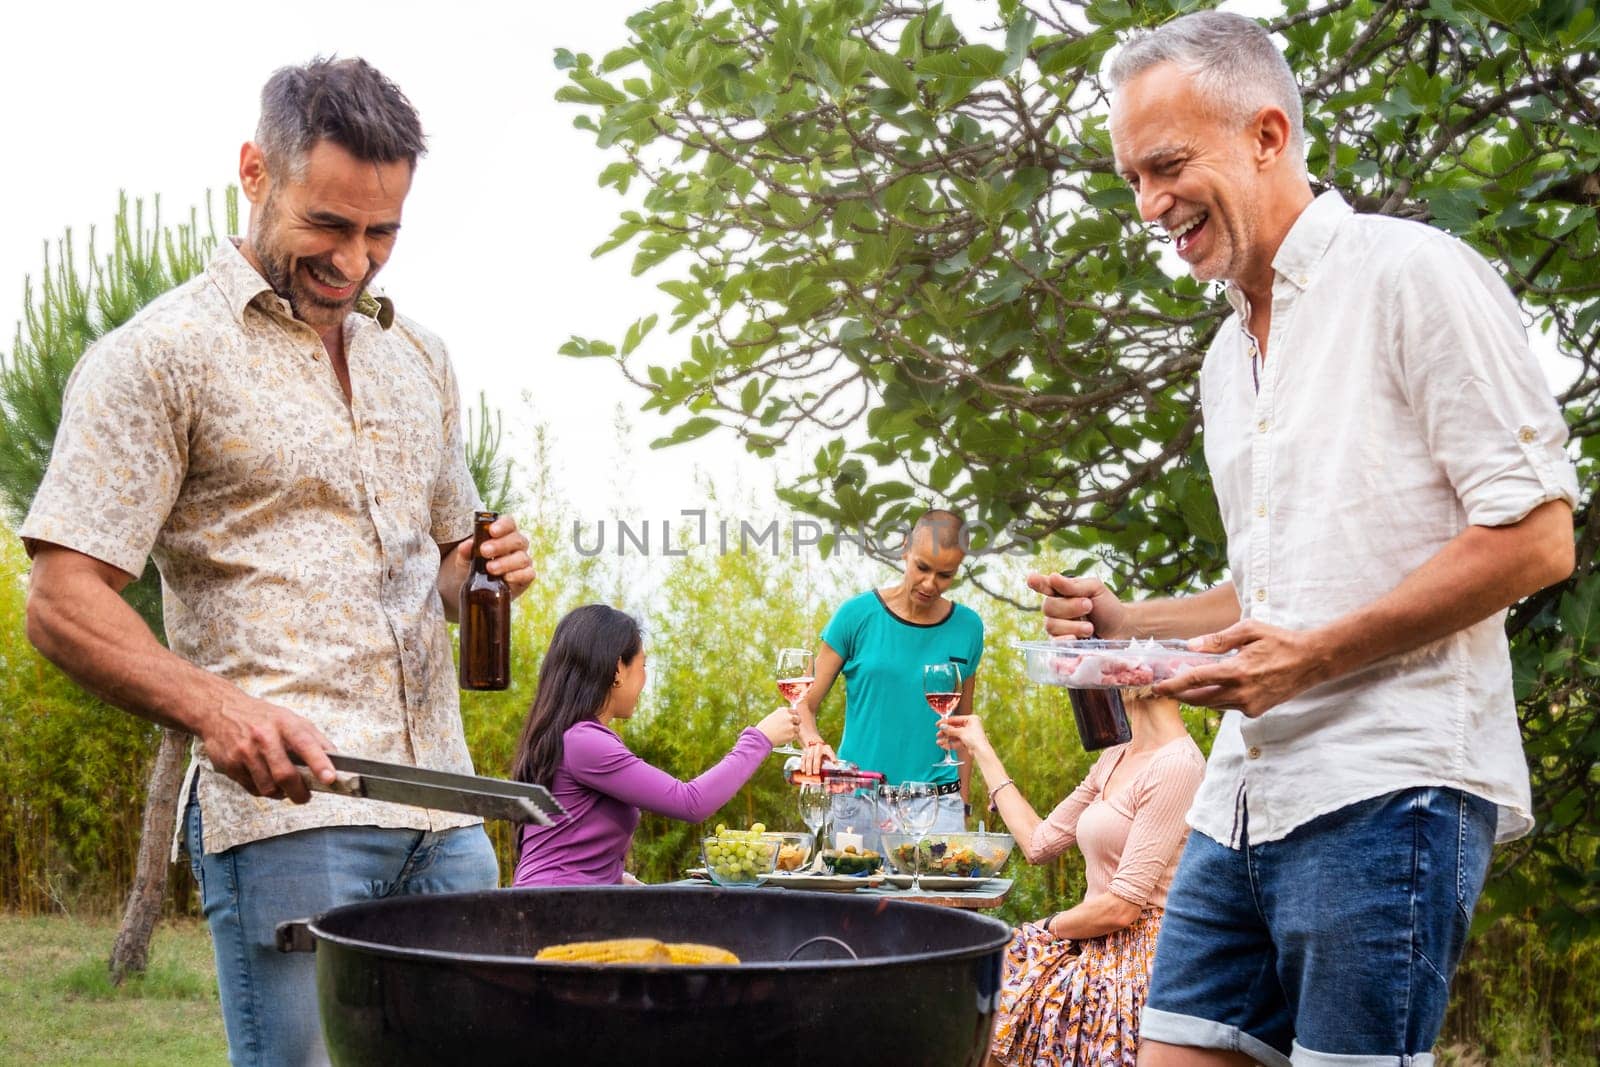 Two men cooking food on grill. Outdoor garden barbecue party. Three women enjoying wine on background. Weekend activities concept.